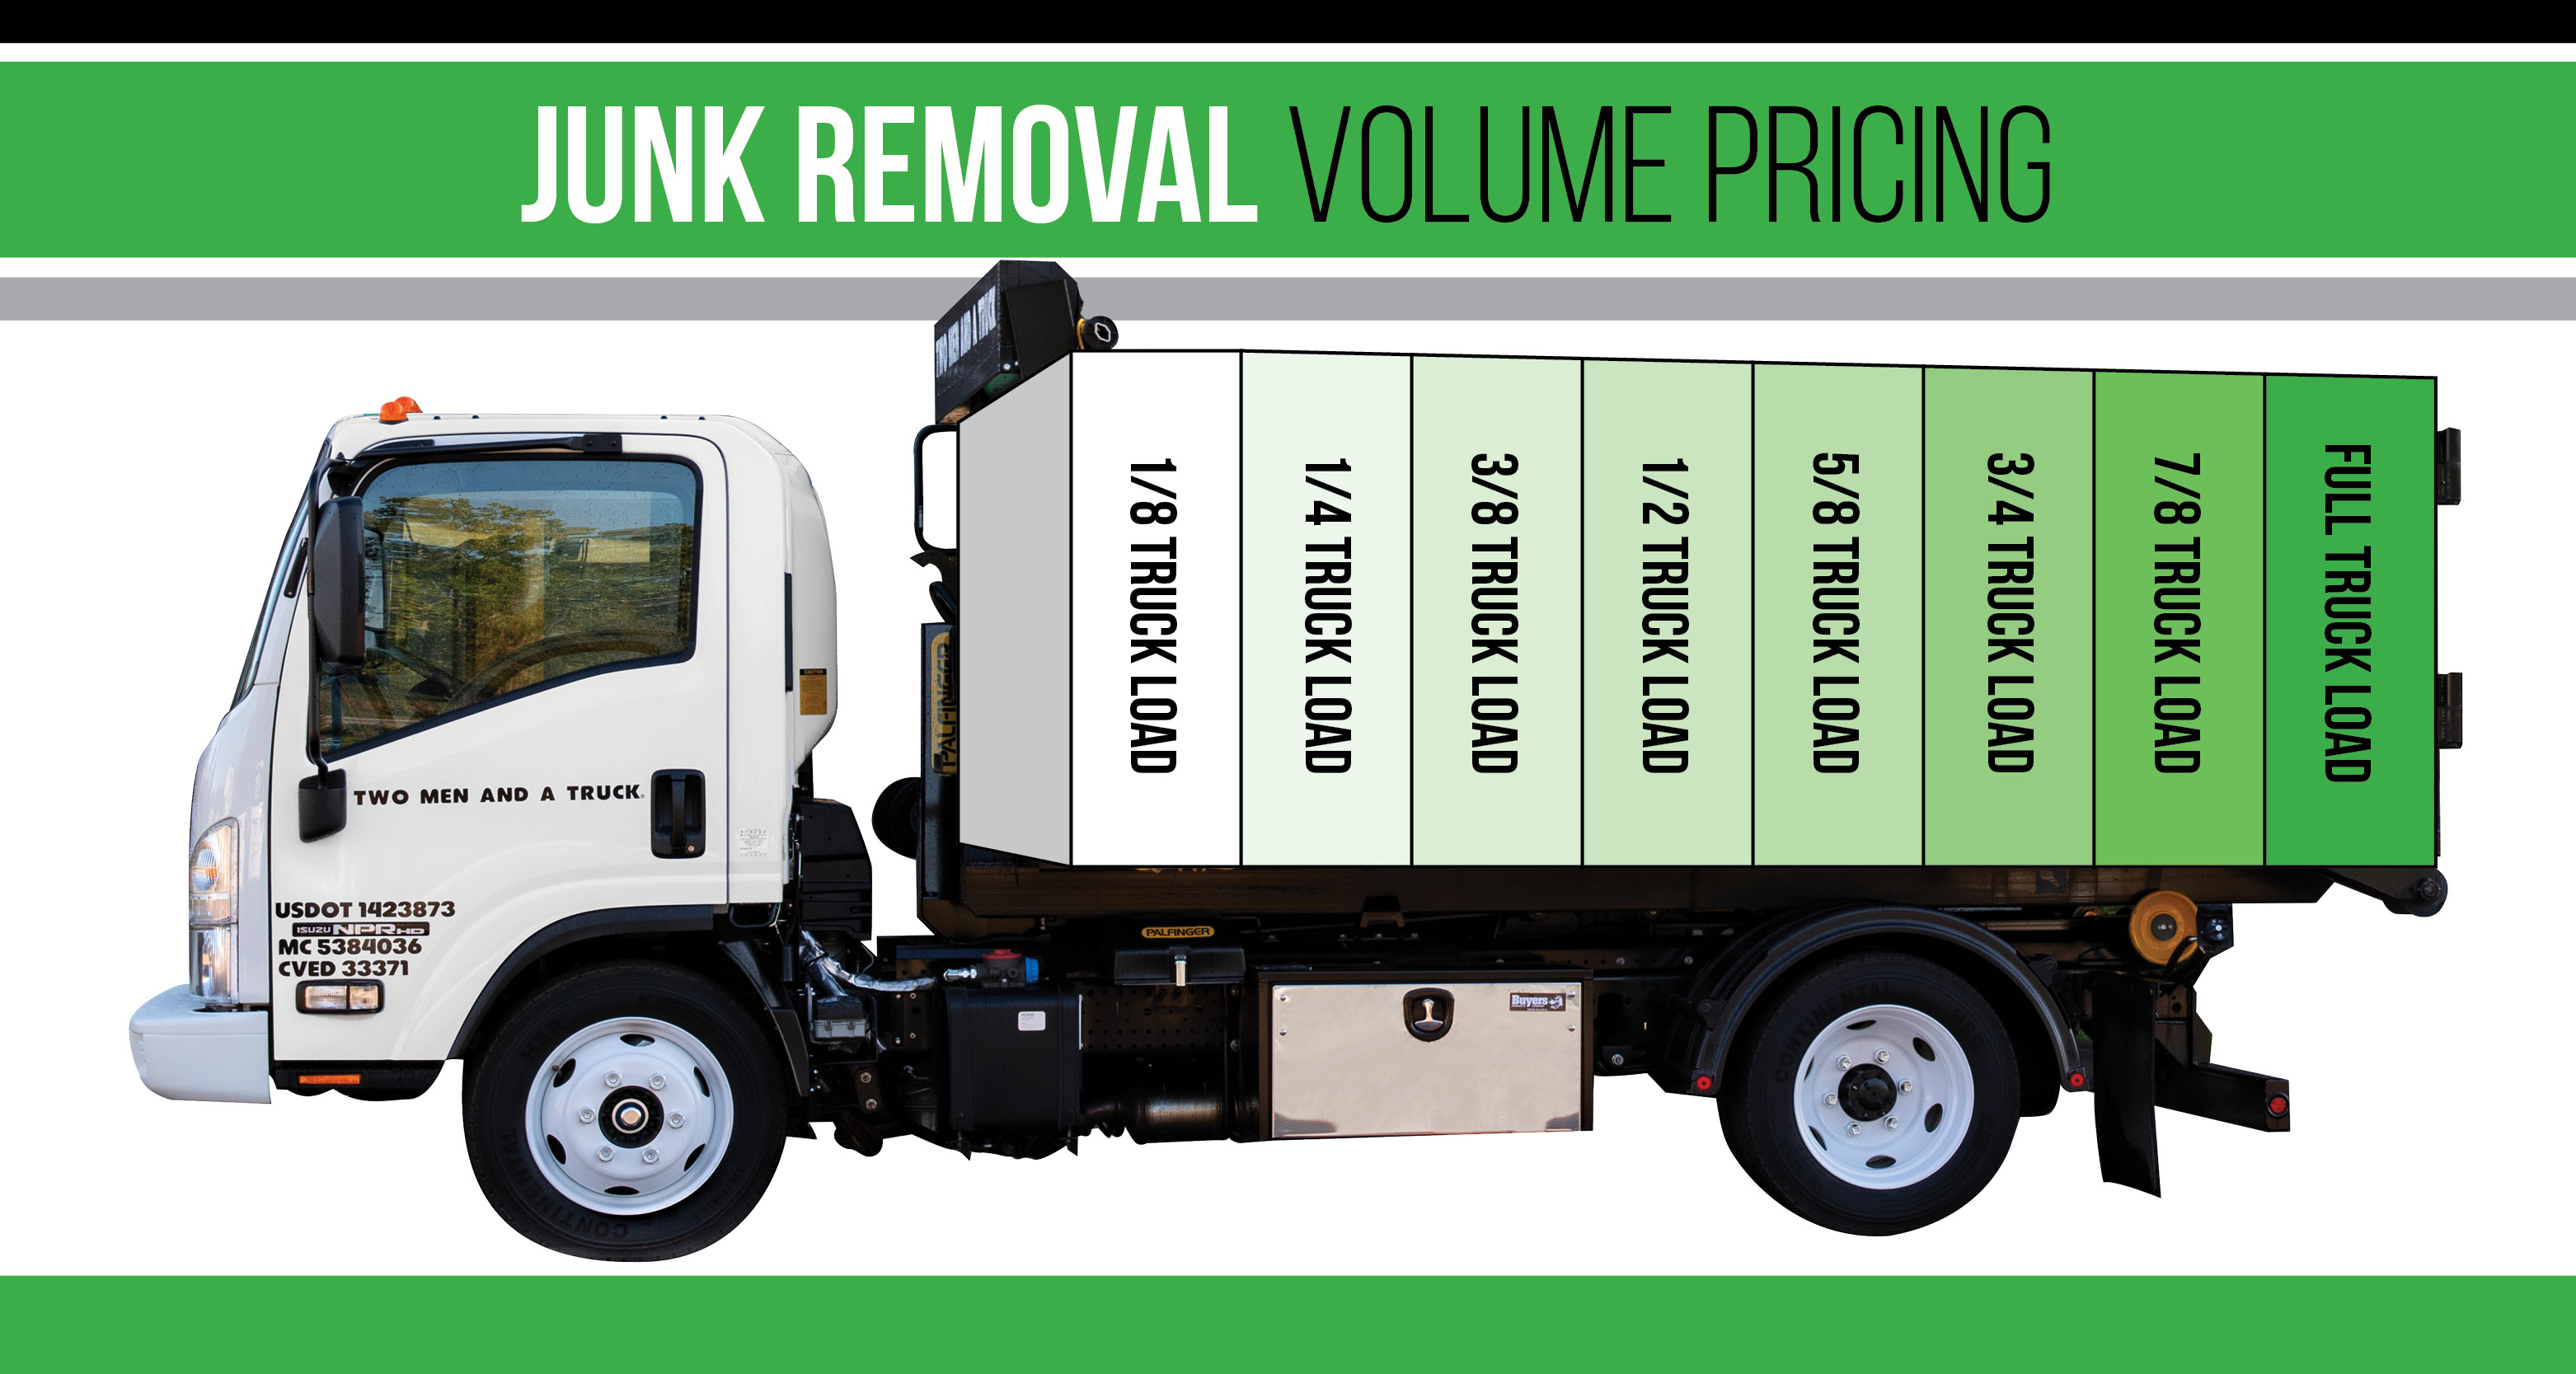 What Your Market World Can Be A Junk Removal Service?